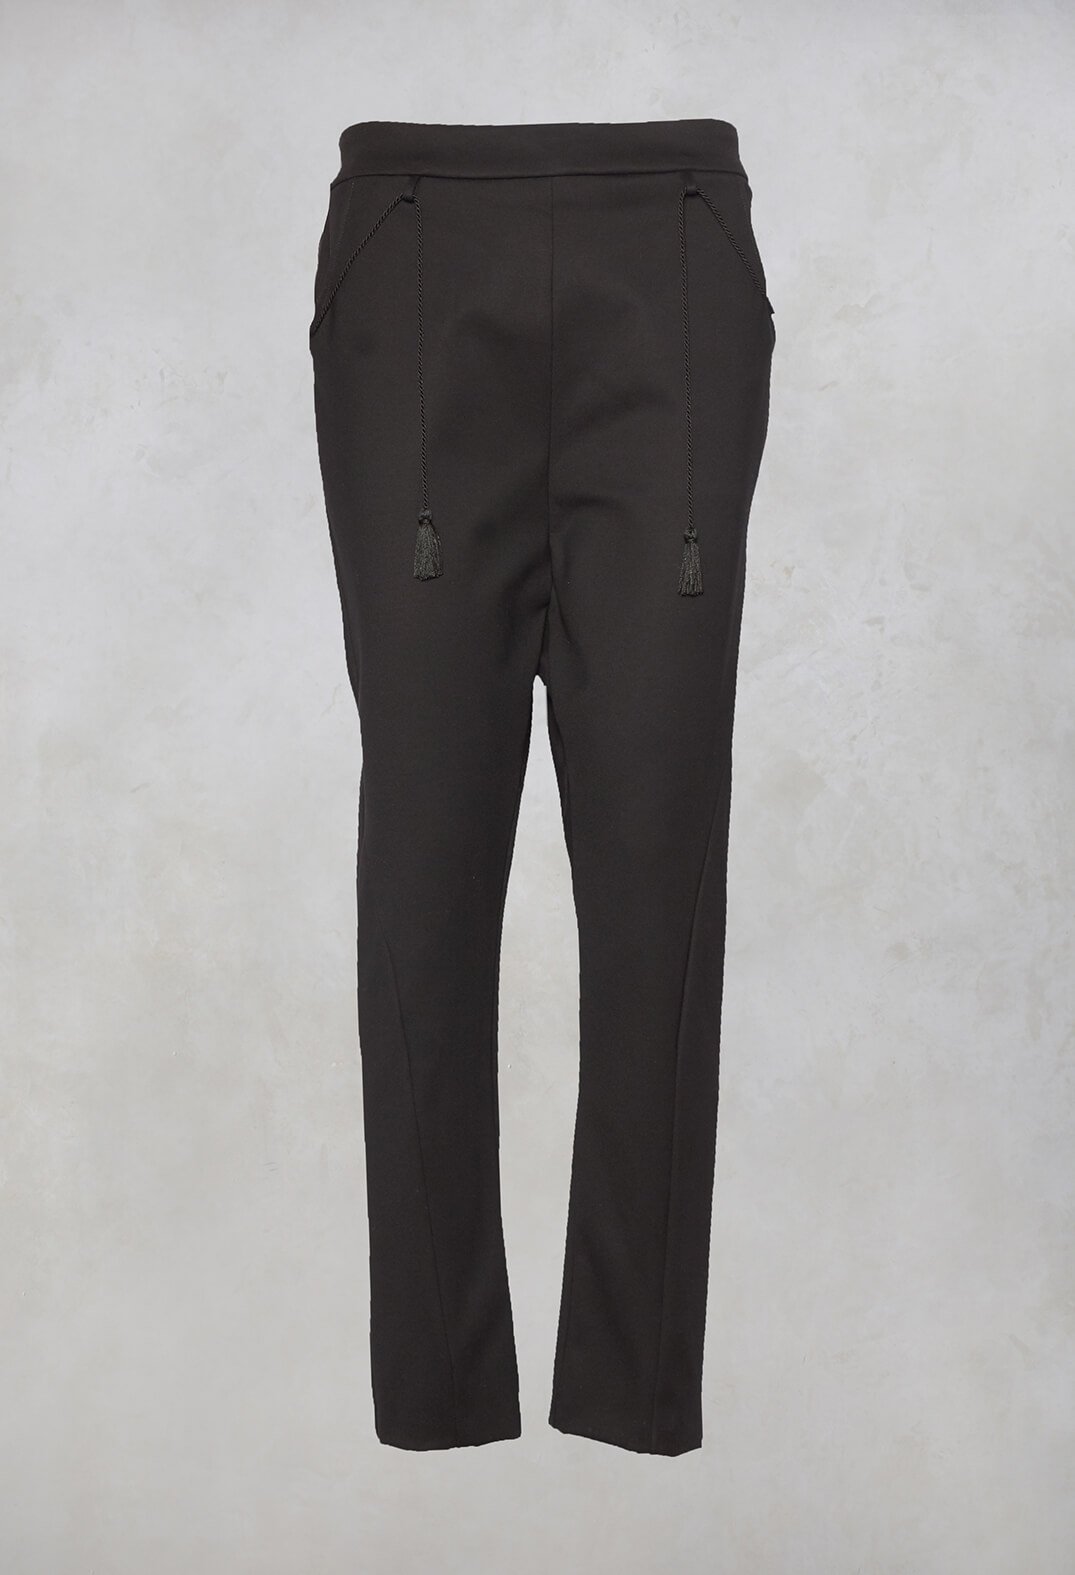 Trousers with Tassels in Black